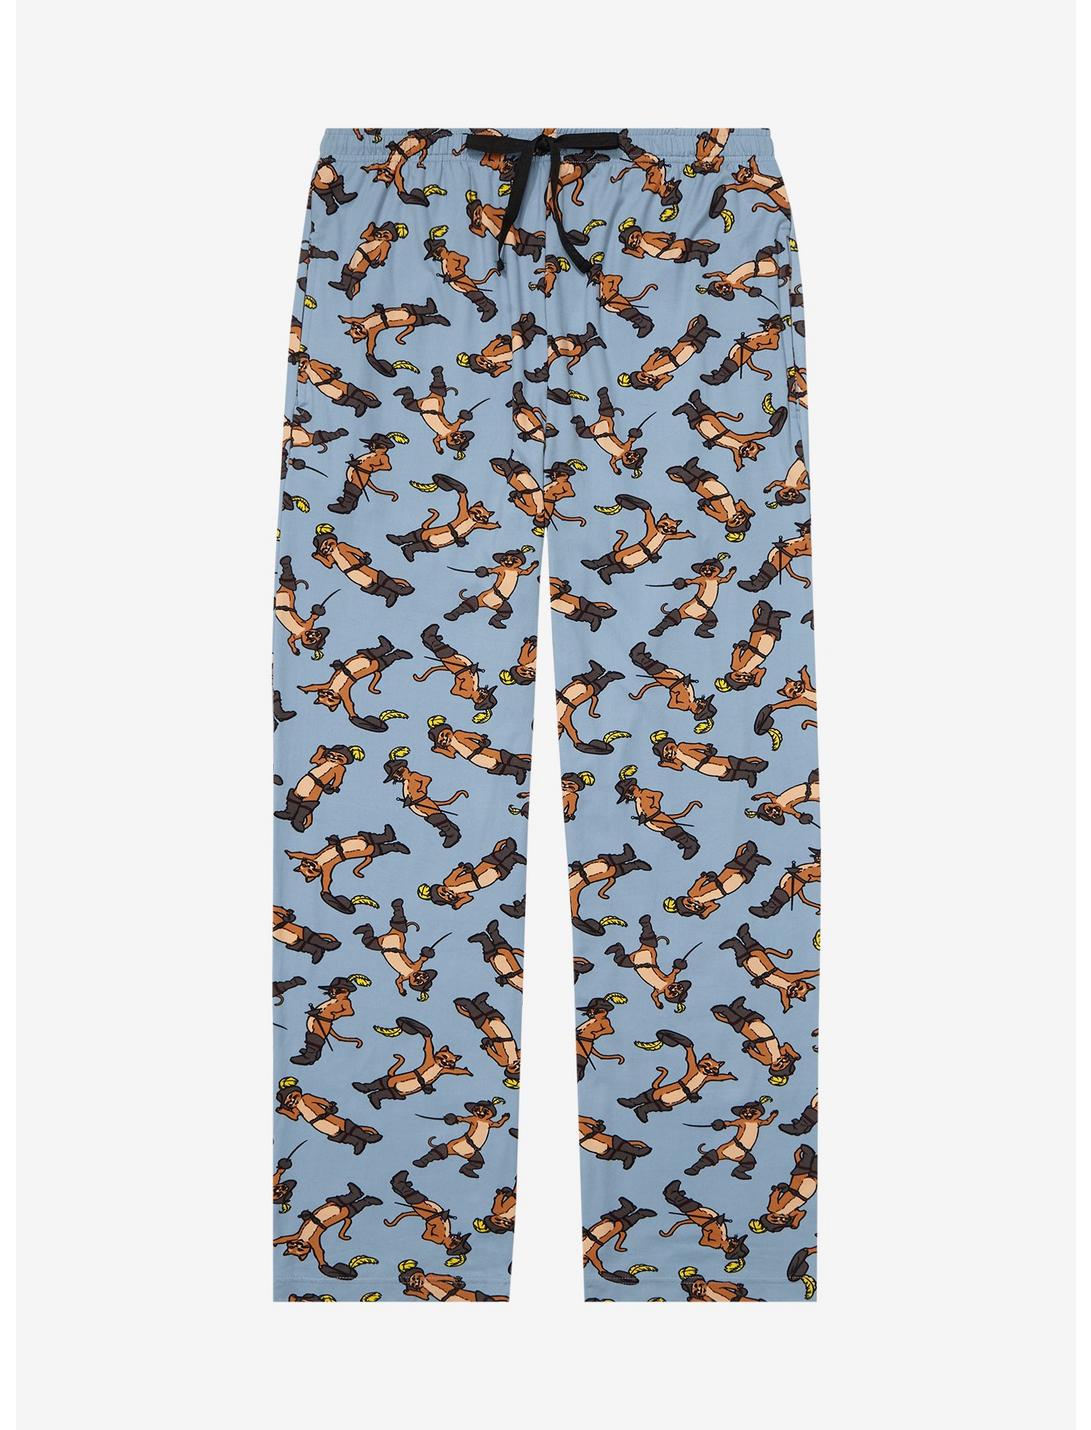 Puss in Boots Portraits Allover Print Sleep Pants - BoxLunch Exclusive, LIGHT BLUE, hi-res